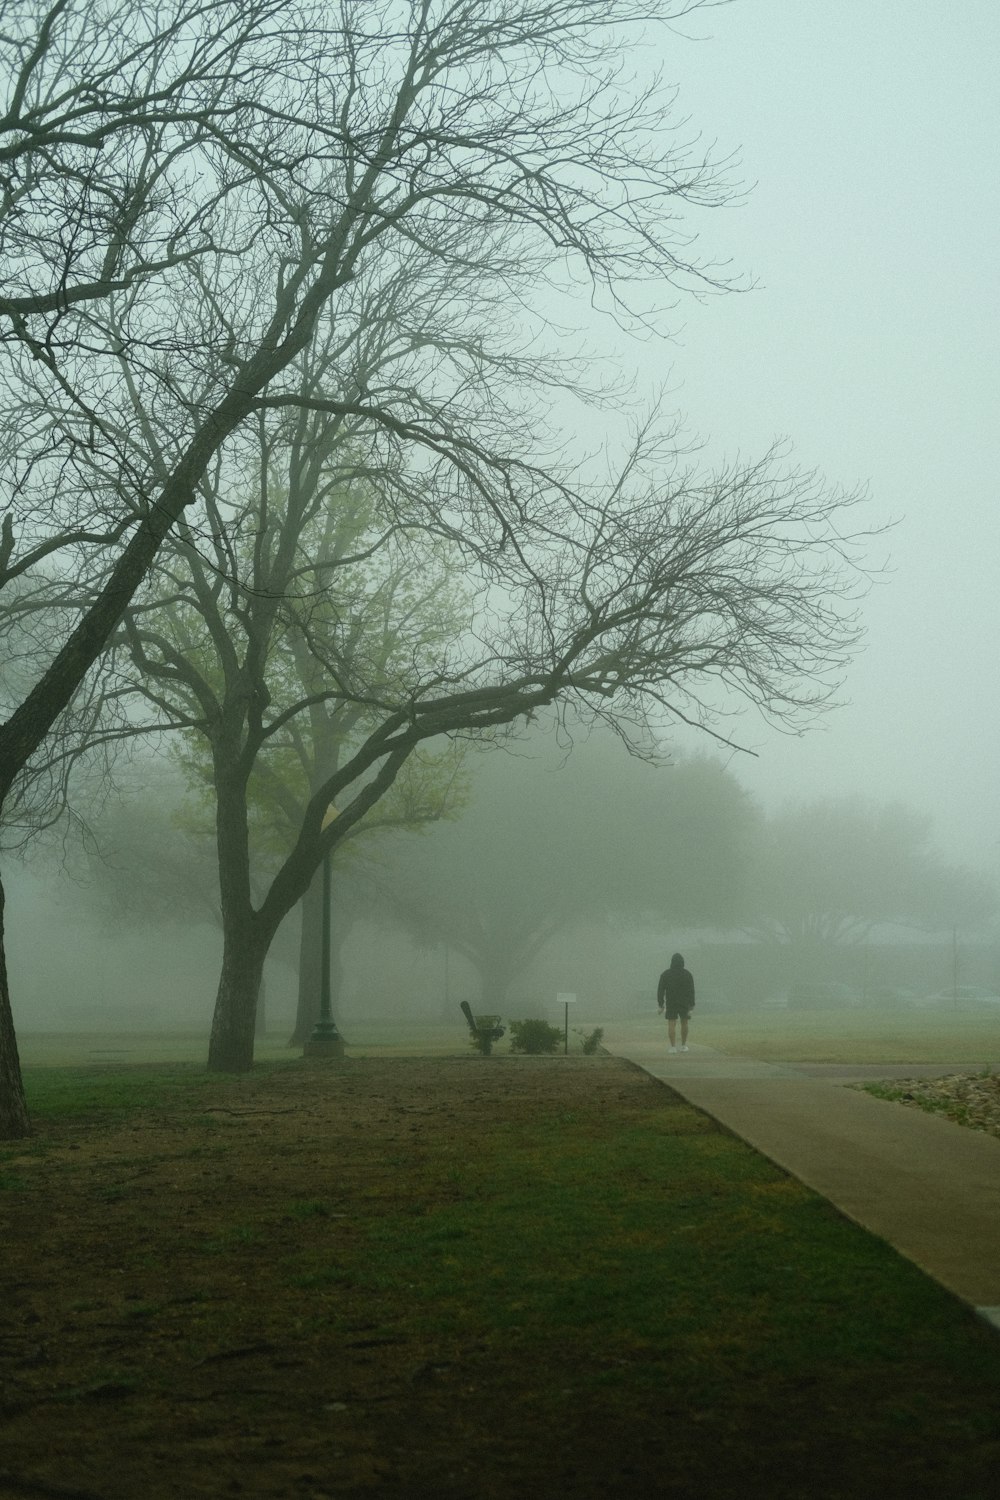 a person walking a dog on a foggy day